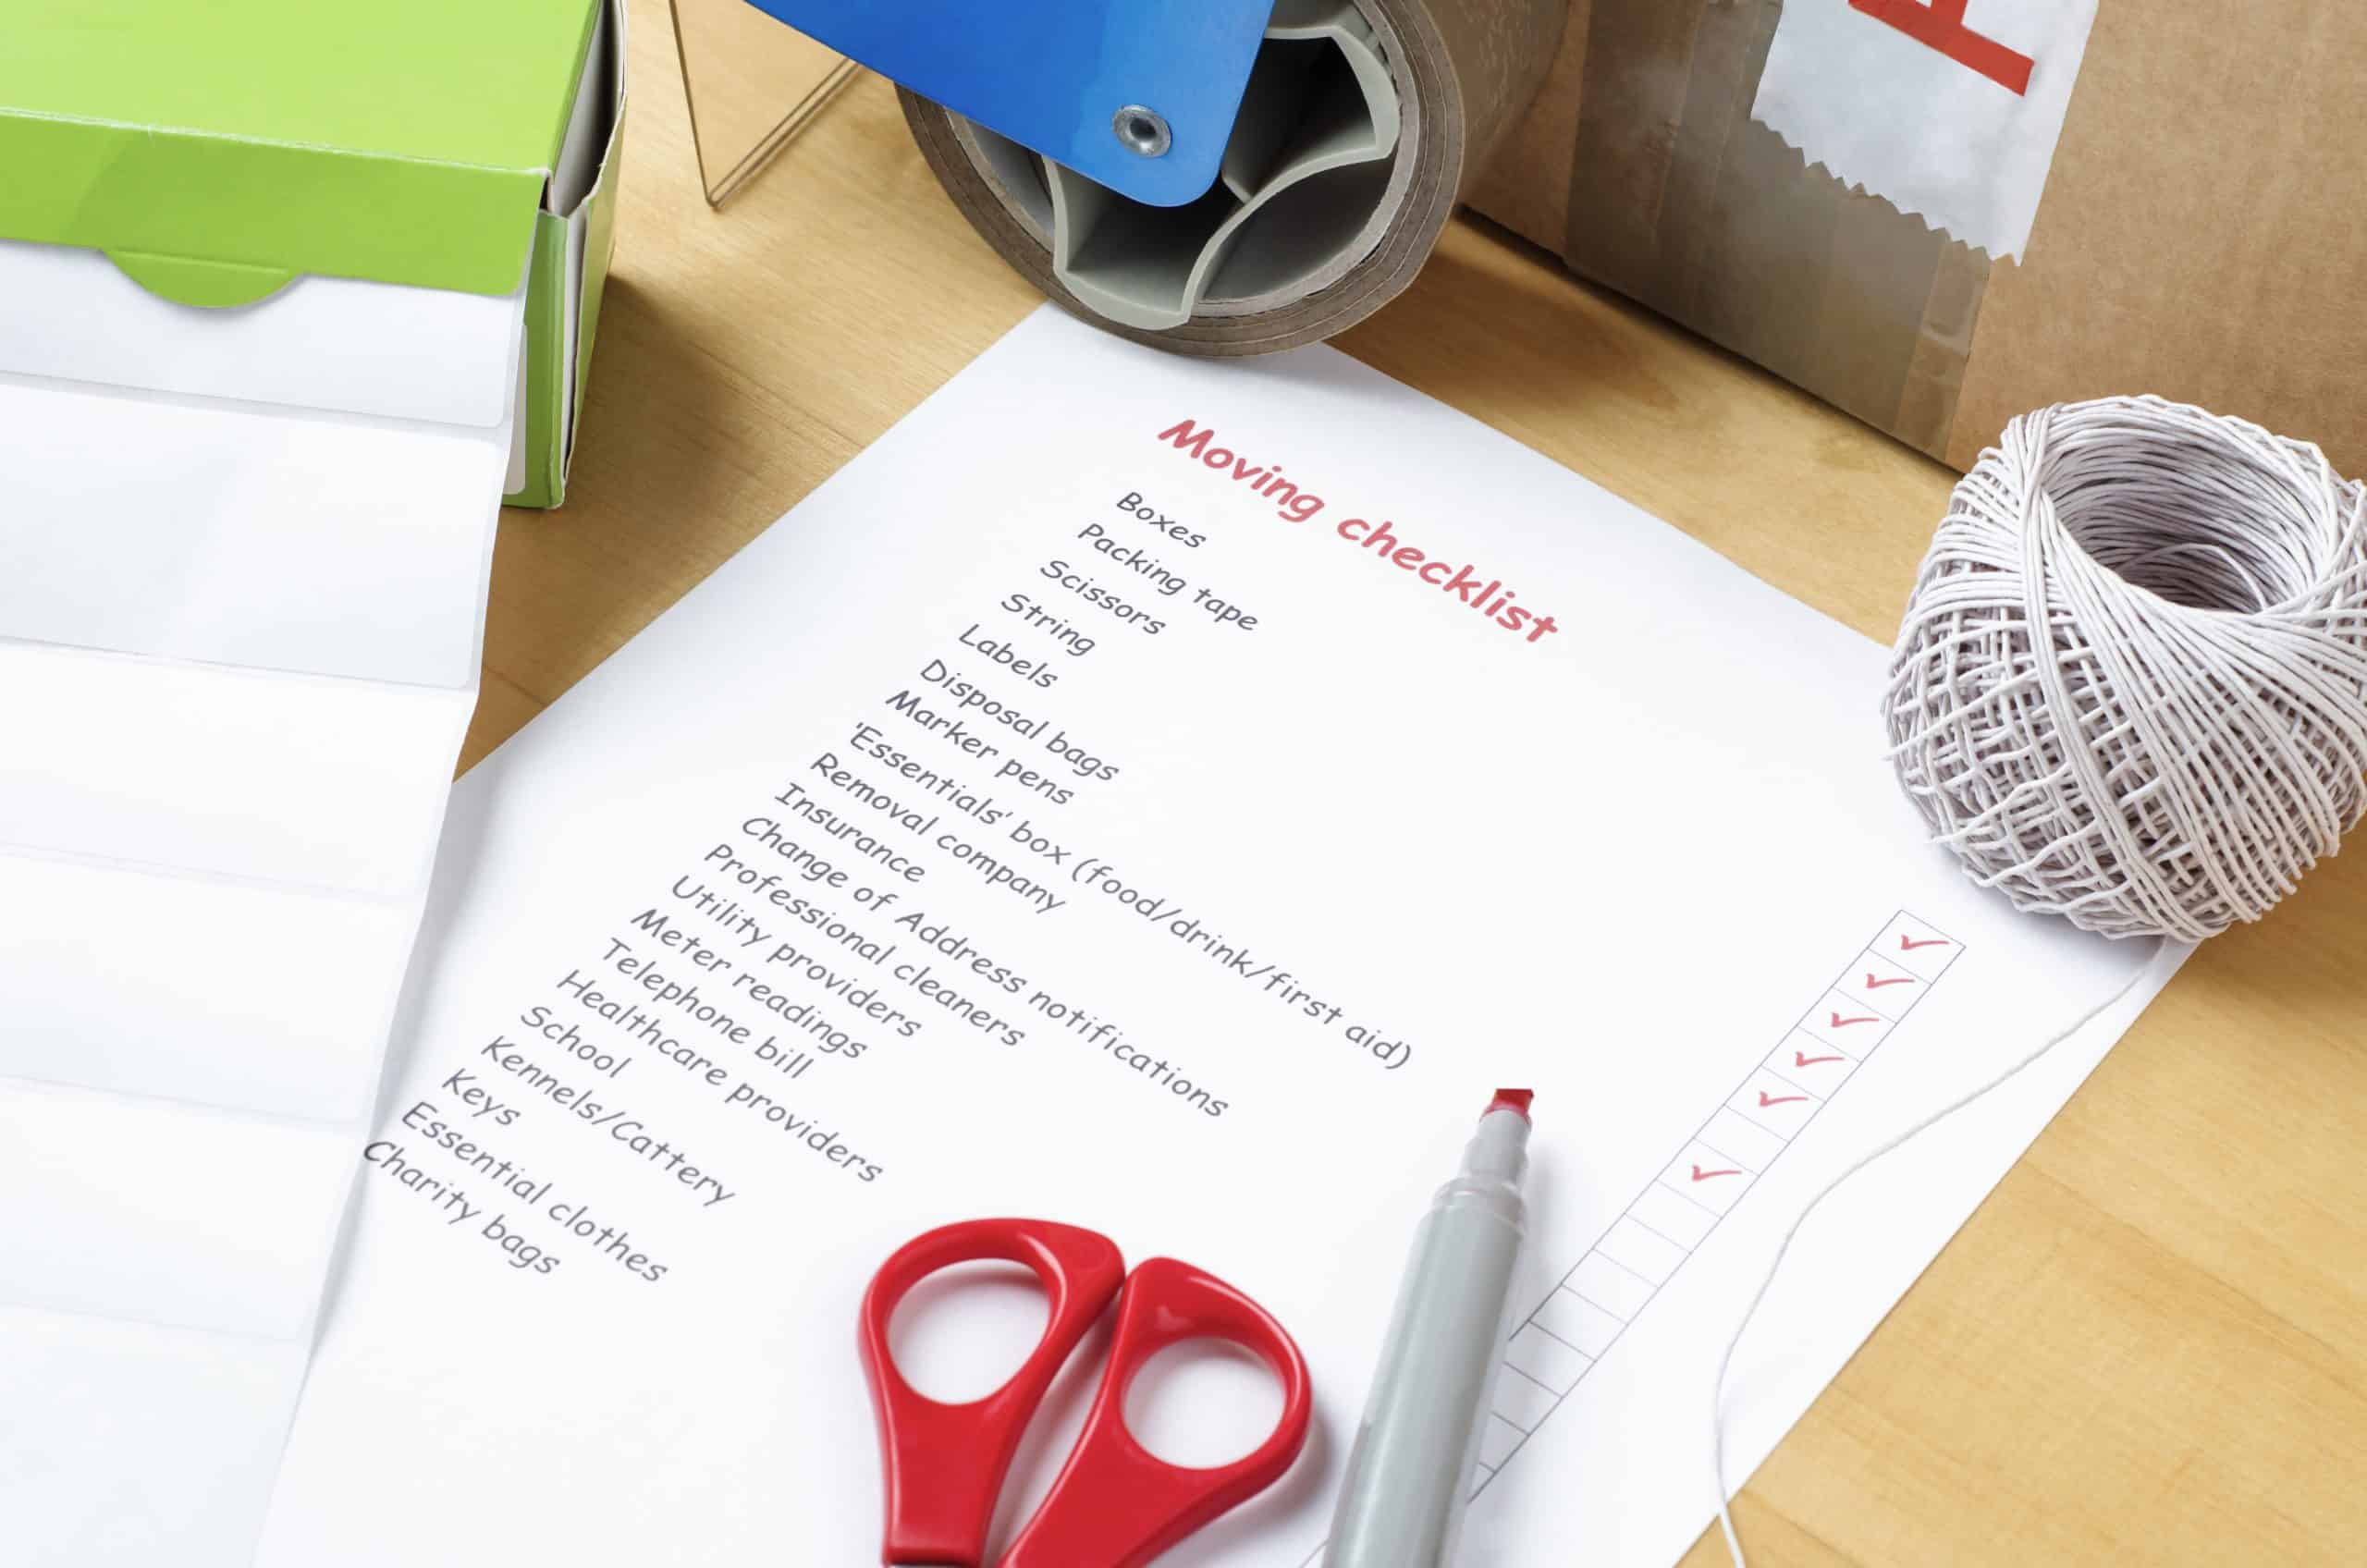 Moving House Storage - image shows a moving checklist printed on a piece of paper laying flat on a cardboard box with scissors, pen and tape gun surrounding it